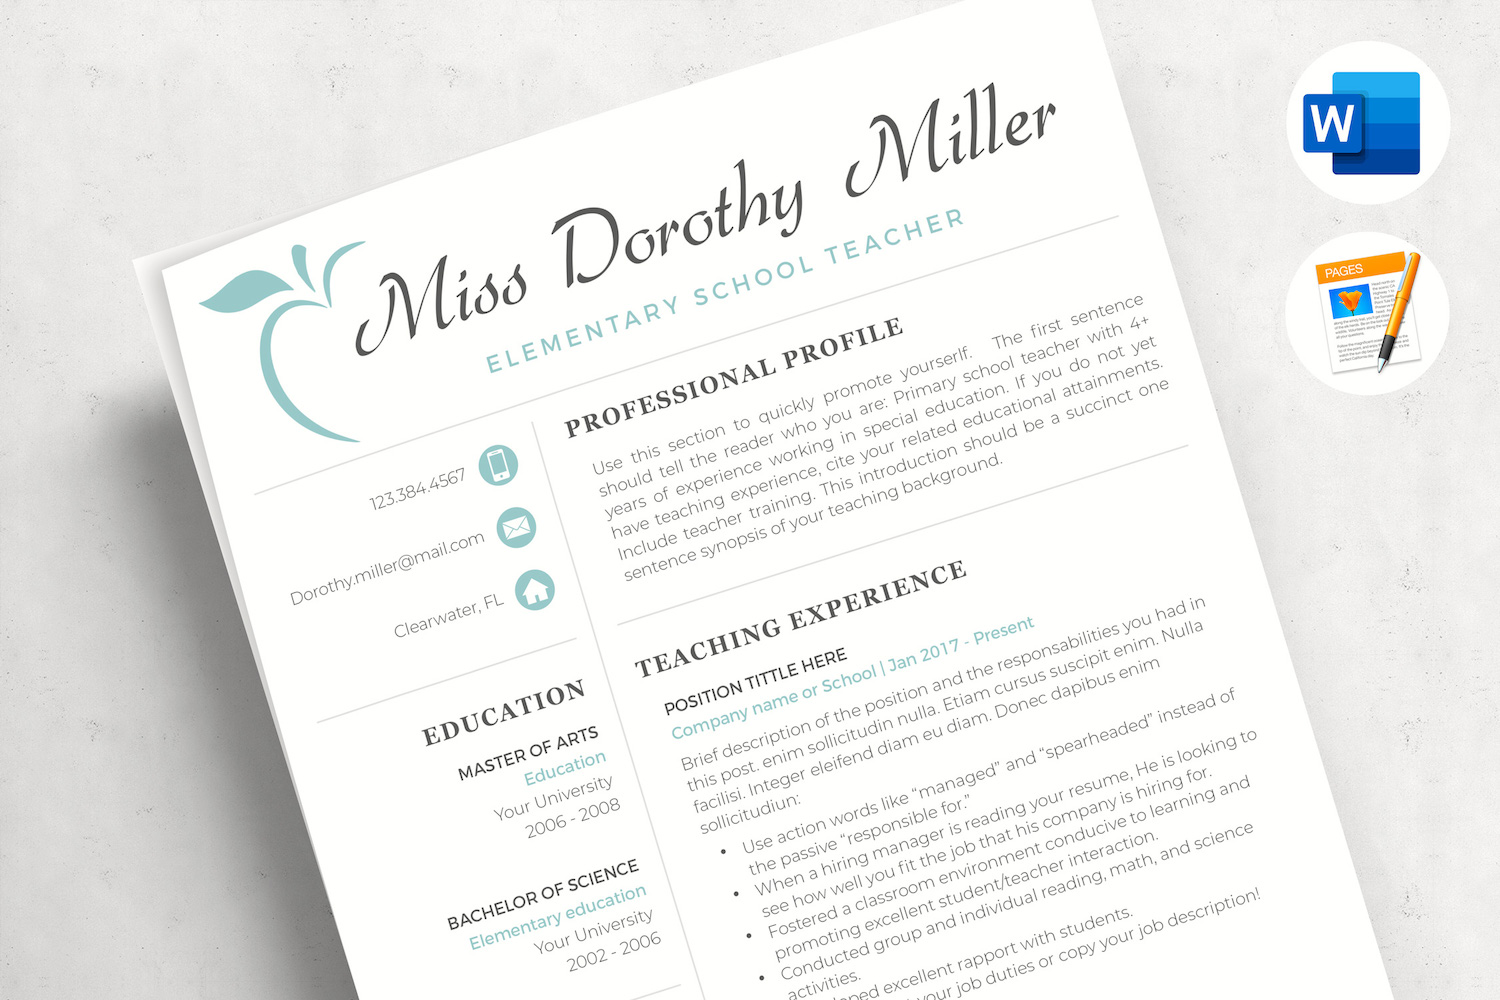 DOROTHY - Elementary Teacher CV Template for MS Word & Pages with Cover Letter and References